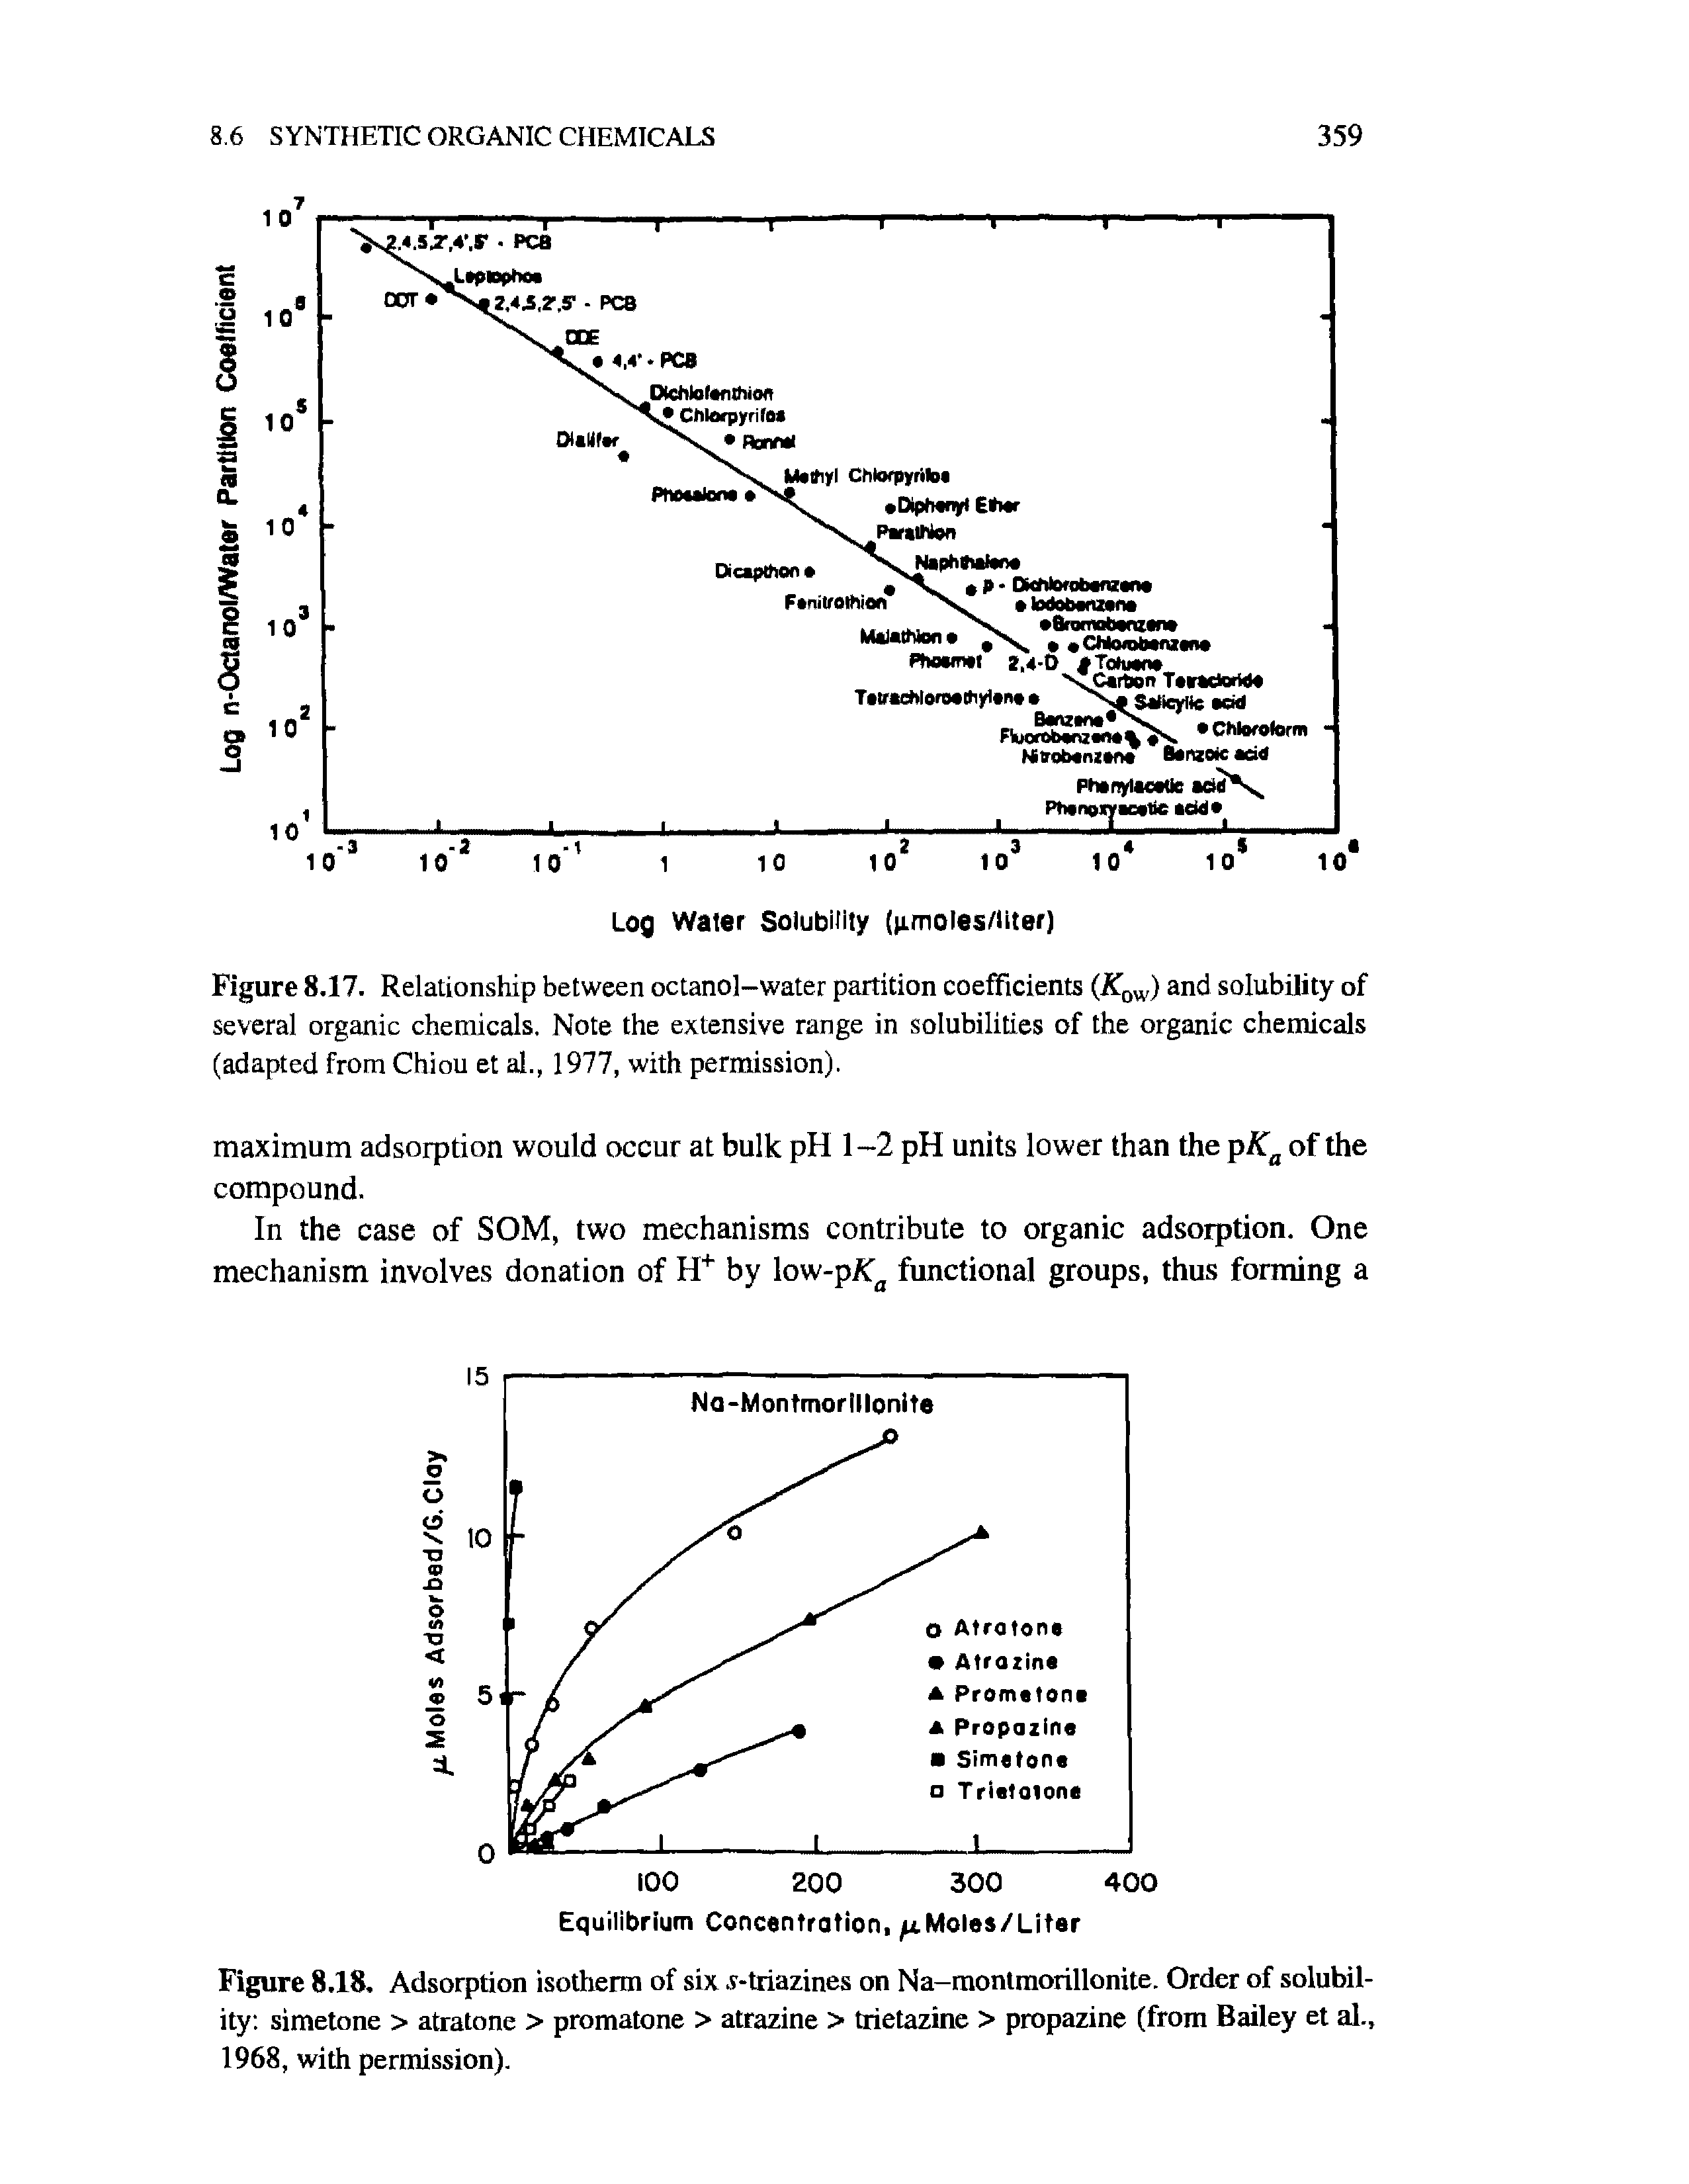 Figure 8.17. Relationship between octanol-water partition coefficients (Kow) and solubility of several organic chemicals. Note the extensive range in solubilities of the organic chemicals (adapted from Chiou et ah, 1977, with permission).